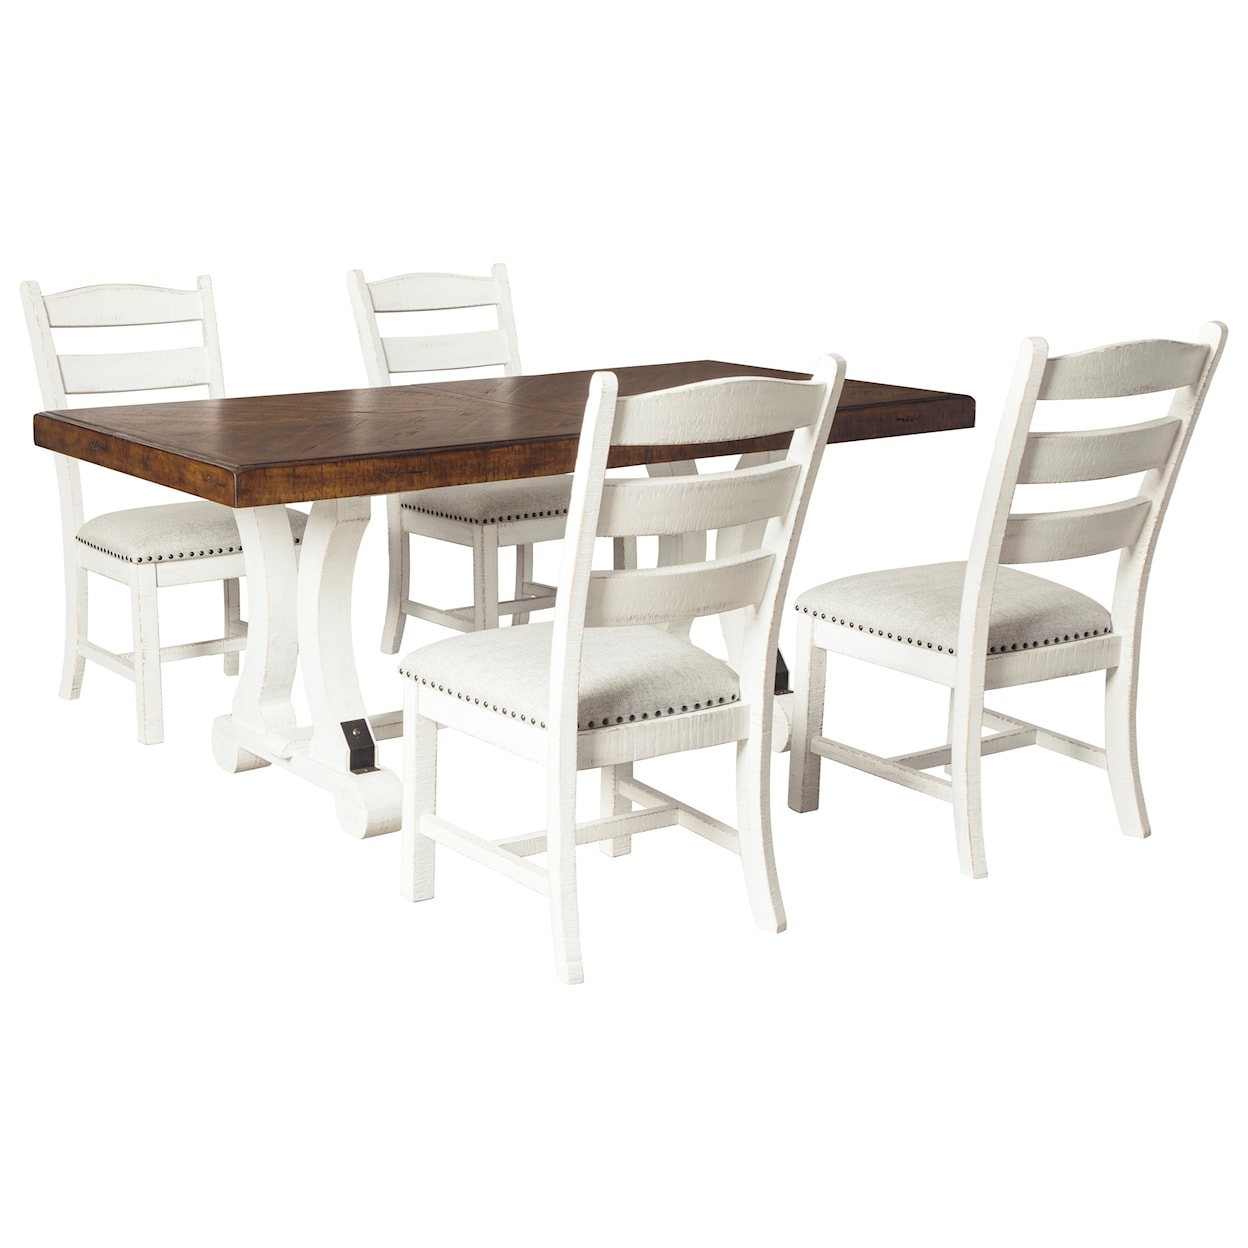 Signature Design by Ashley Valebeck 5-Piece Table and Chair Set